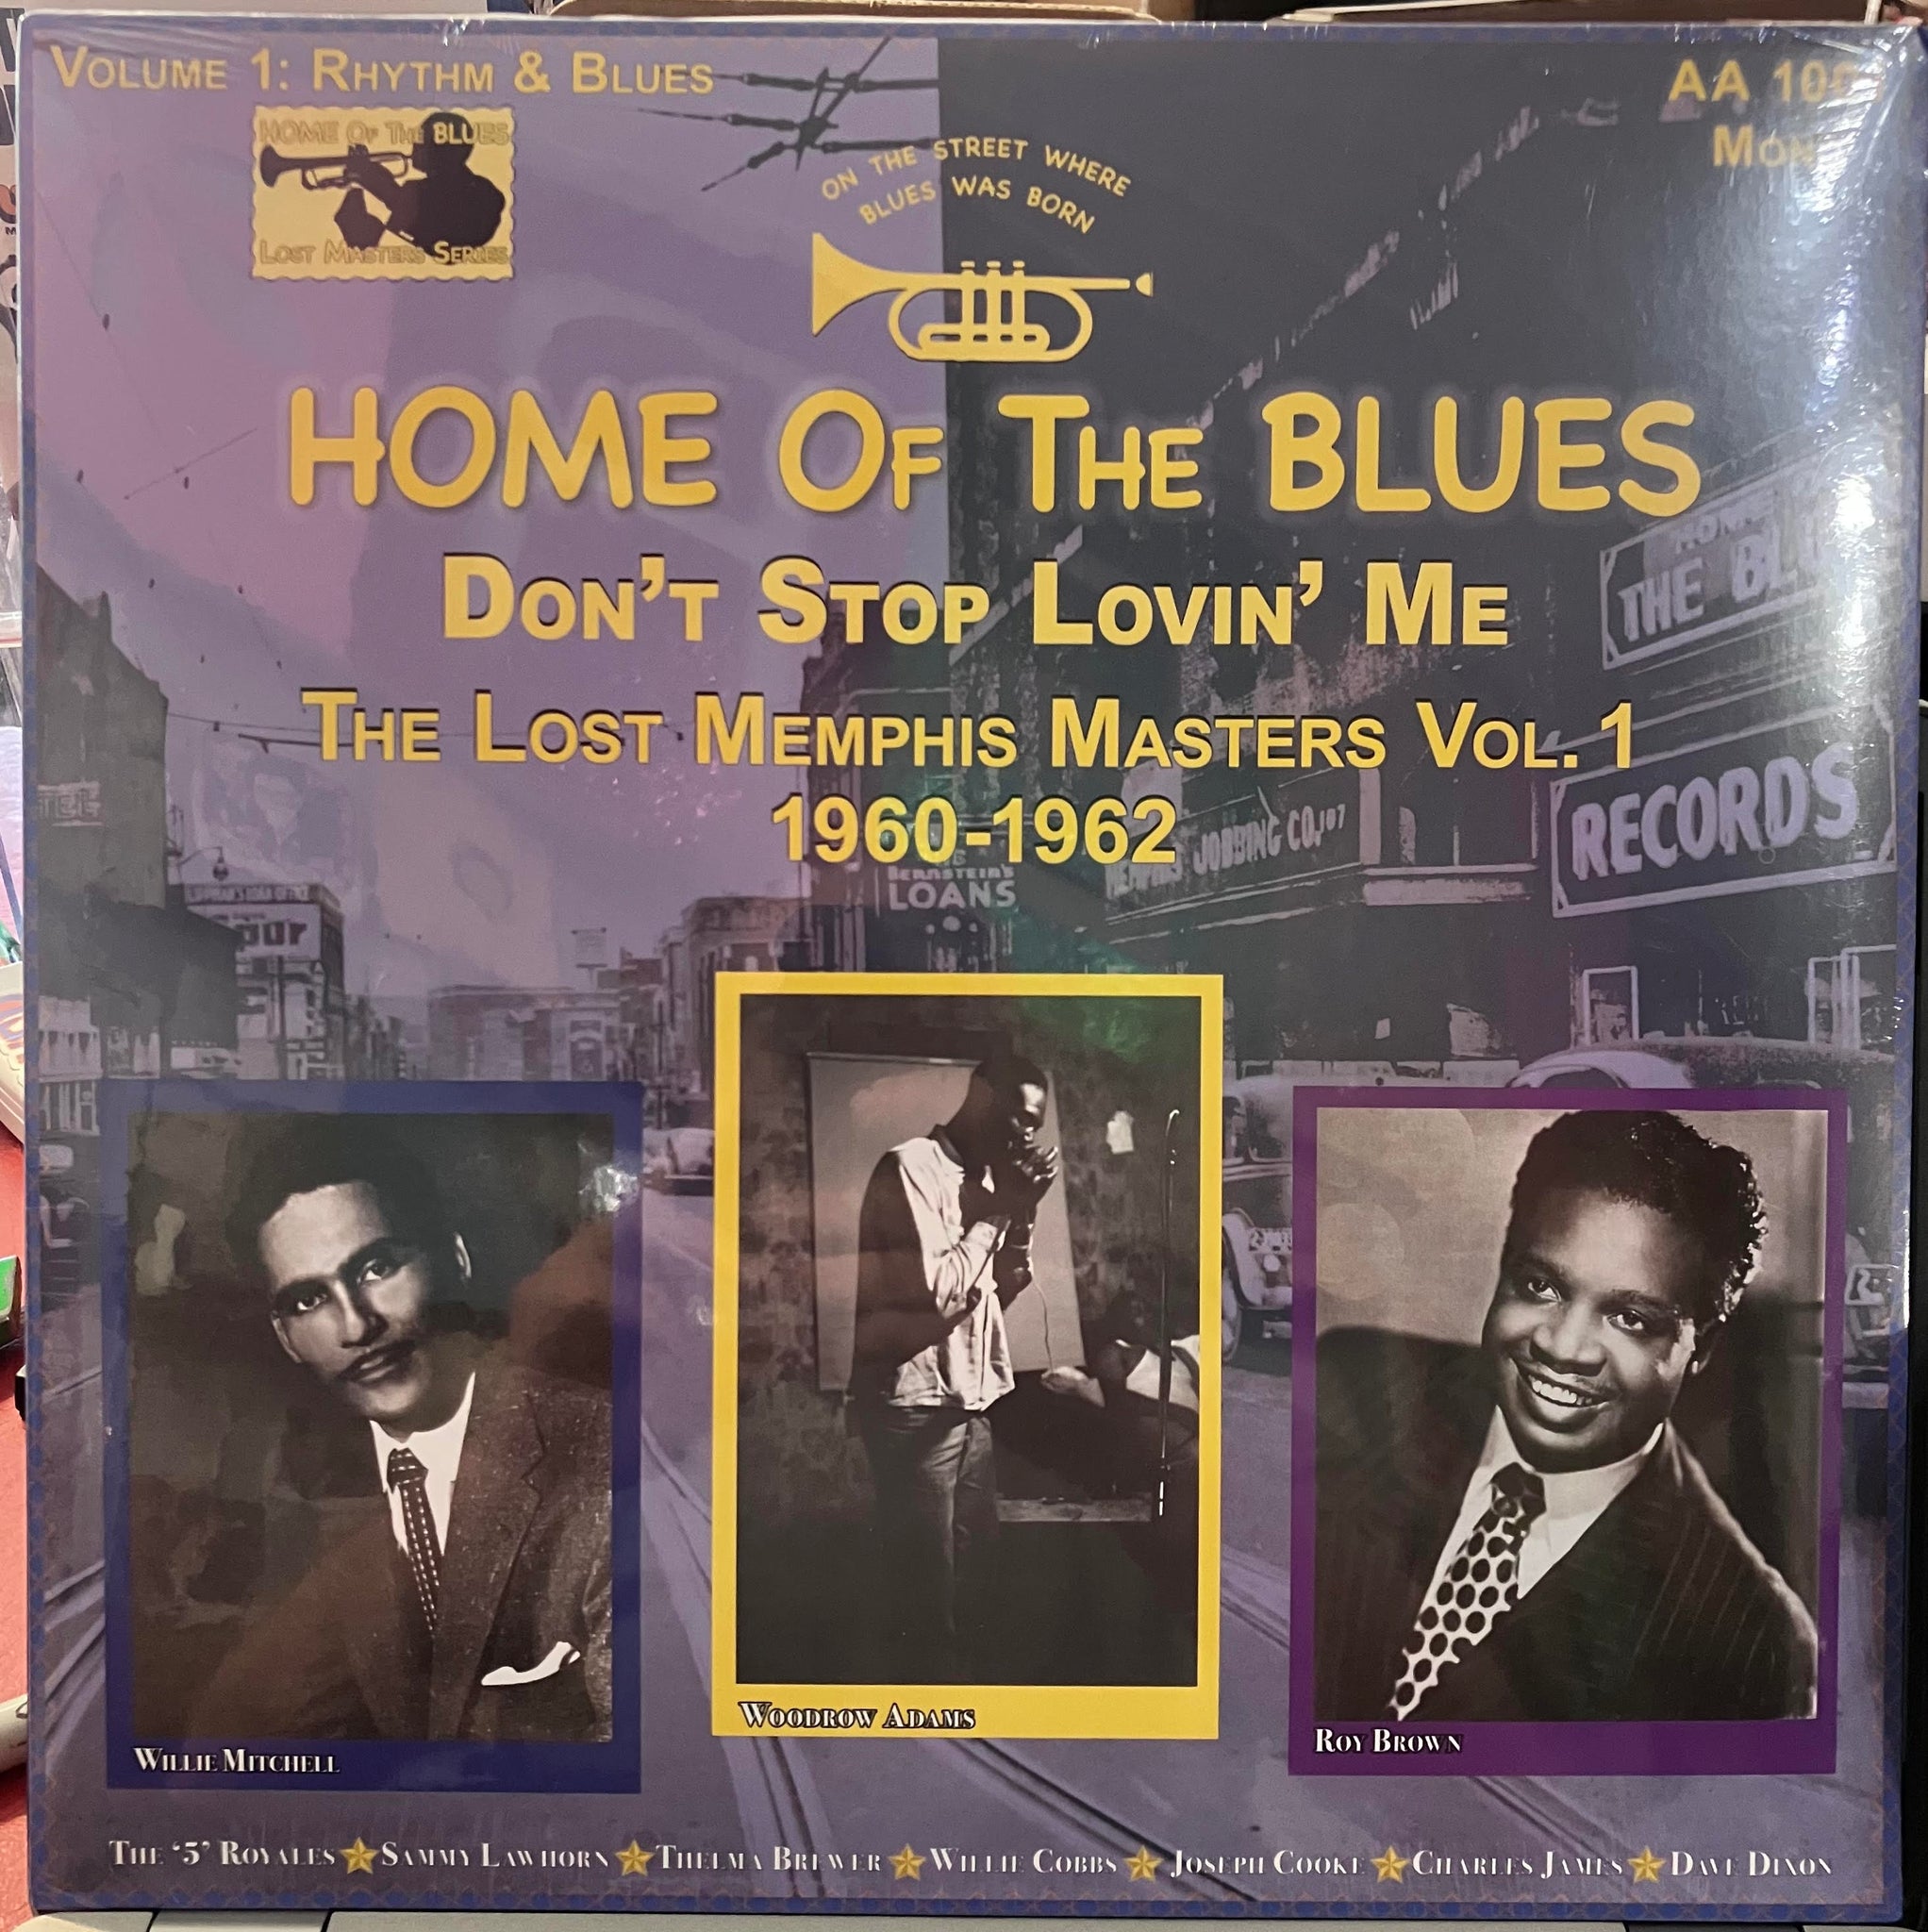 V/A - Home of the Blues: The Lost Memphis Masters Vol. 1 1960-1962